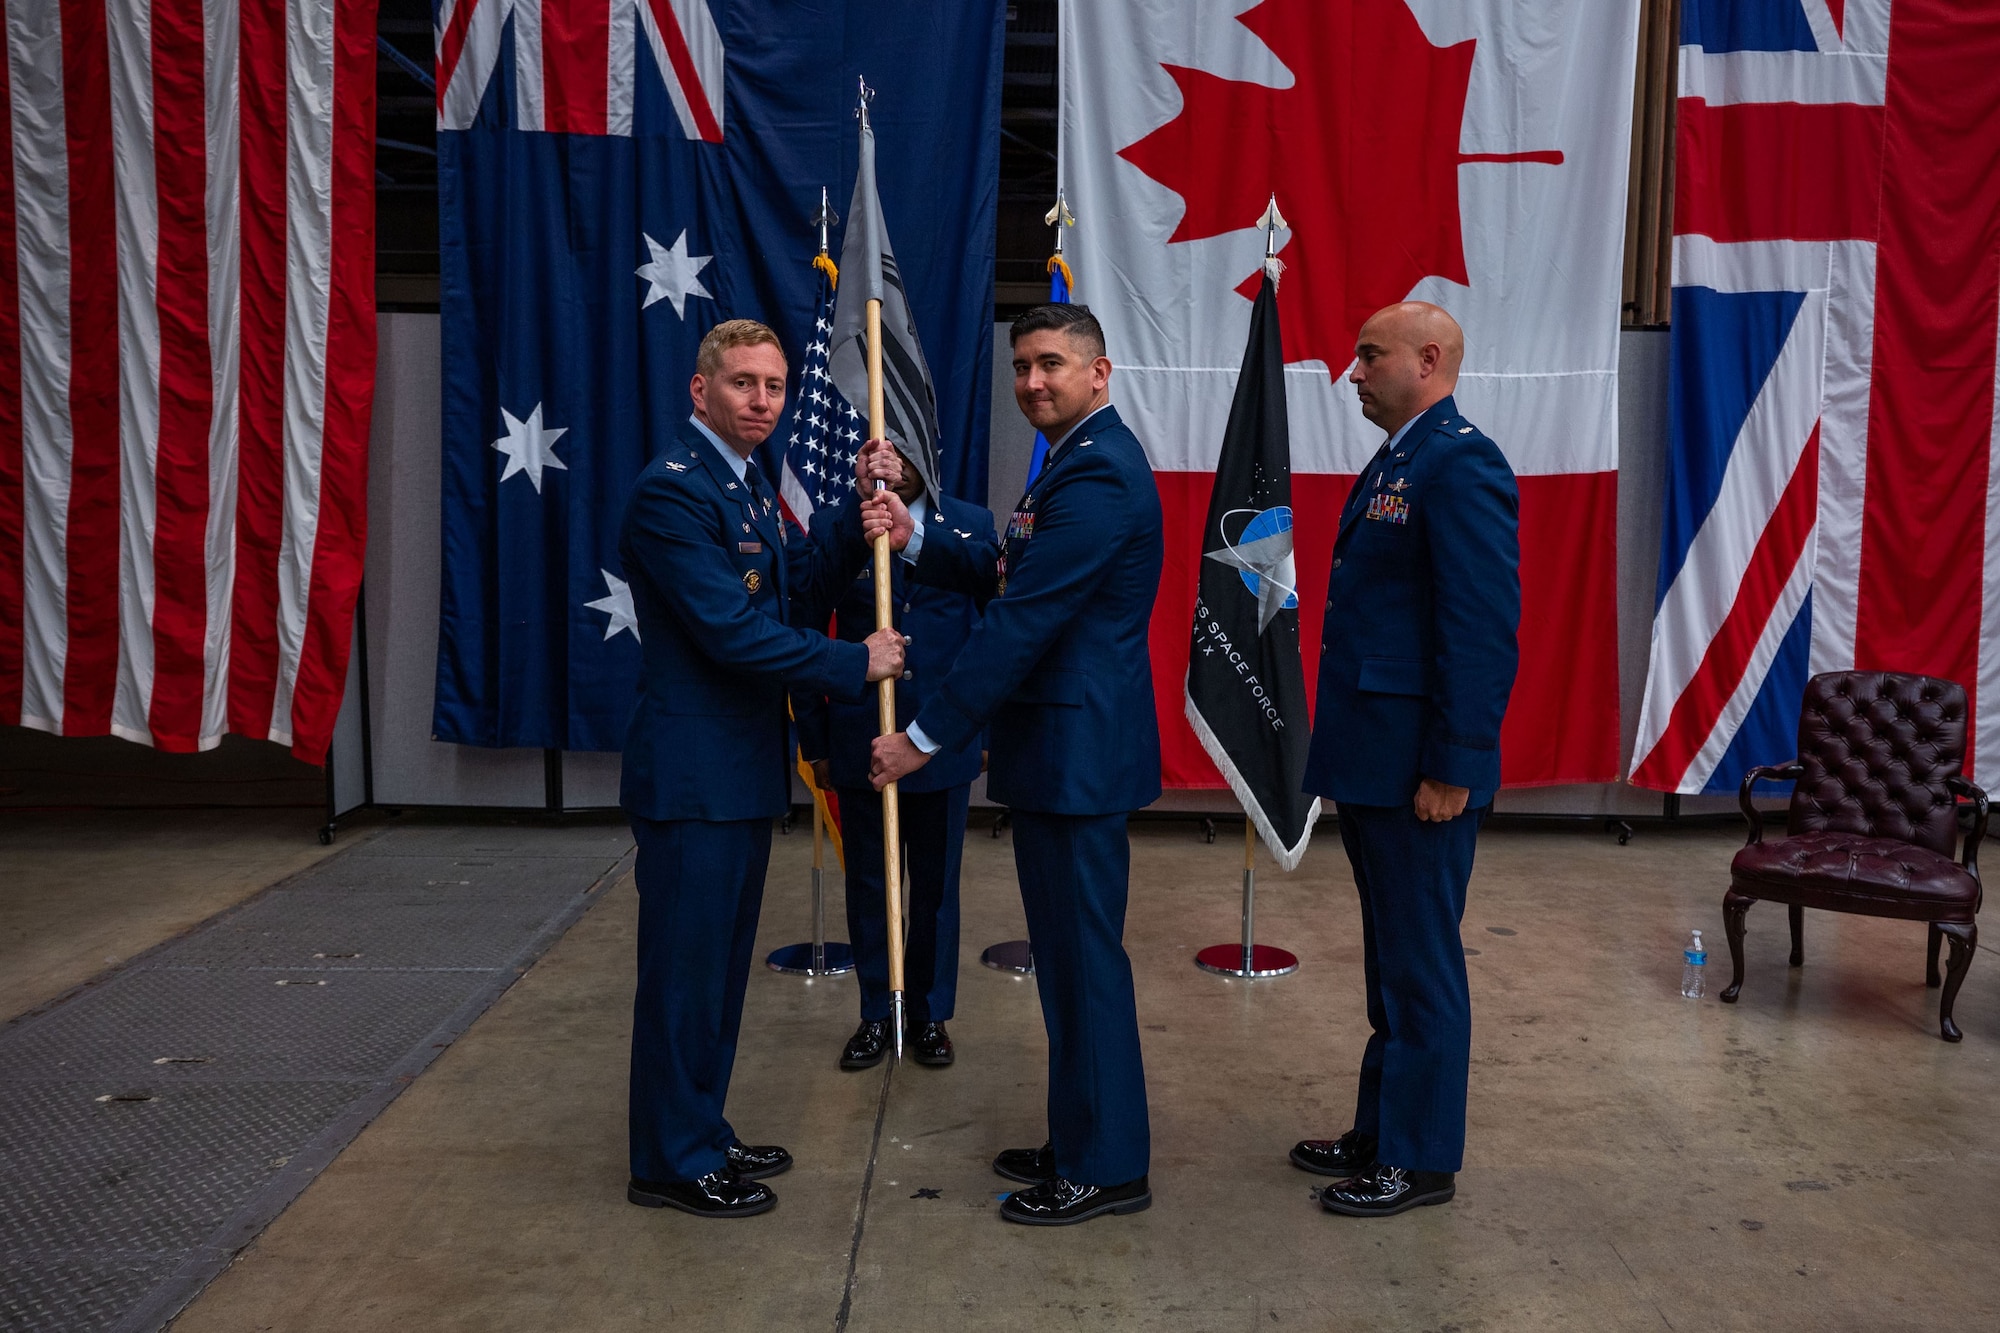 U.S. Space Force Col. Christopher Kennedy, Space Delta 6 commander, left, receives the 65th Cyberspace Squadron (65 CYS) guidon from Lt. Col. Jason Thompson, outgoing 65 CYS commander, middle, while Lt. Col. Jacob Majewski, incoming 65 CYS commander, stands by during the 65 CYS change of command ceremony at Vandenberg Space Force Base, Calif., July 21, 2023. (U.S. Space Force photo by Tech. Sgt. Luke Kitterman)